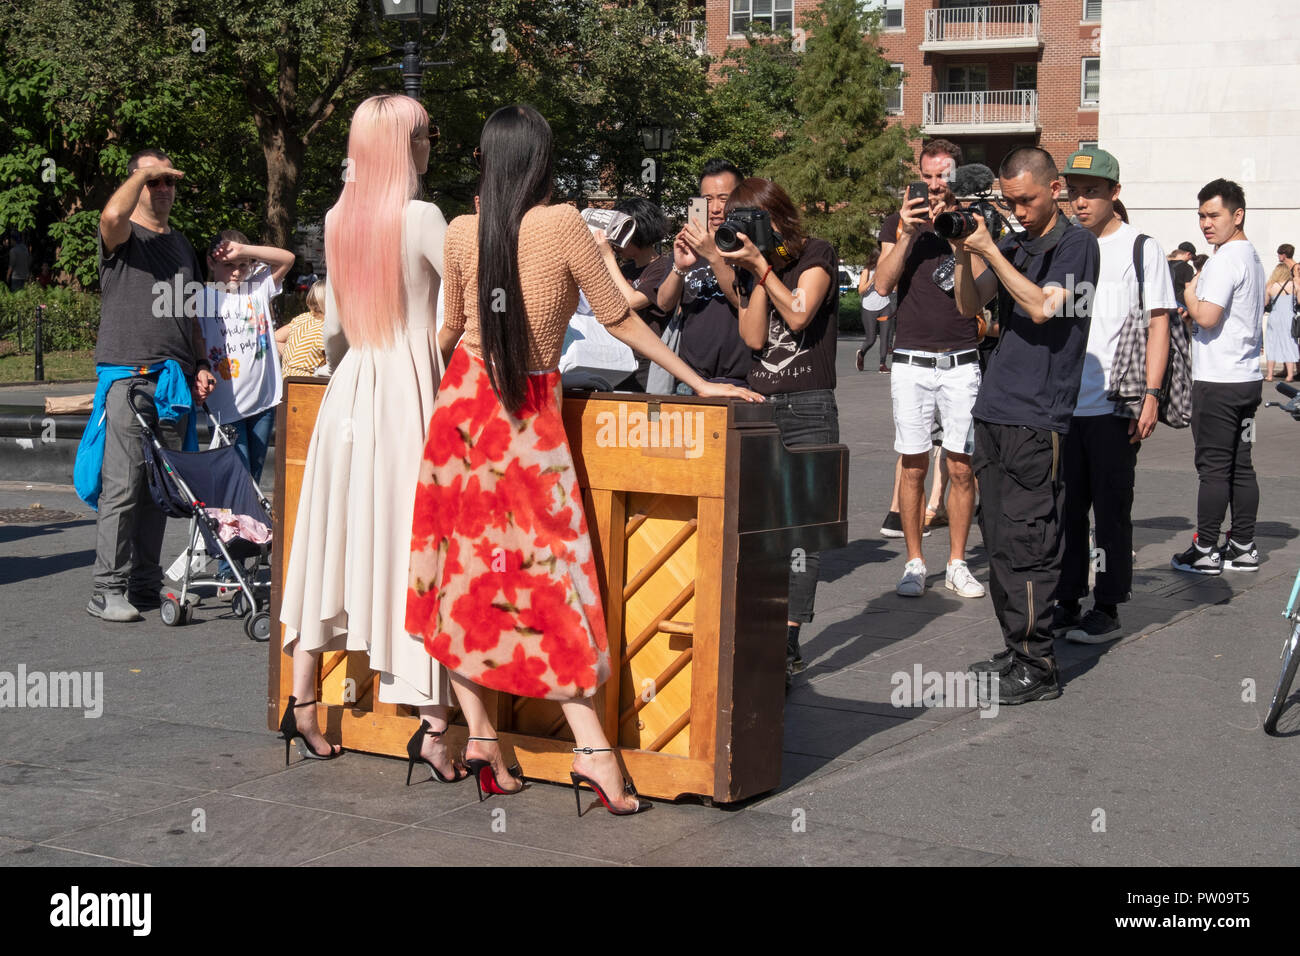 Two beautiful slender Japanese models, their photographers, entourage & onlookers in Washington Square Park in Greenwich Village, New York City. Stock Photo